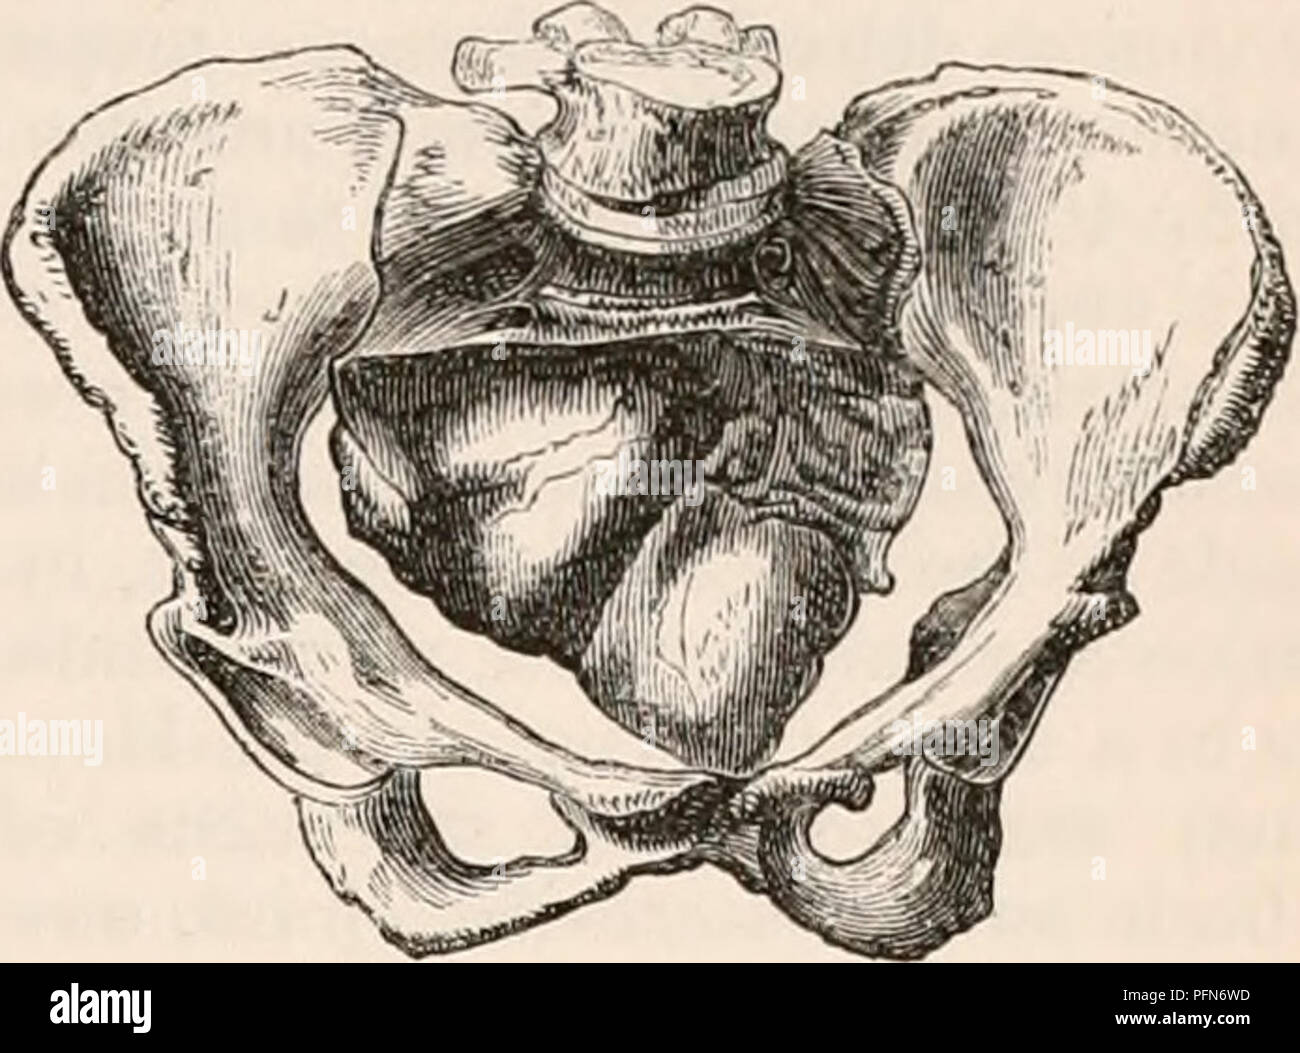 . The cyclopædia of anatomy and physiology. Anatomy; Physiology; Zoology. PELVIS. 20,3 Whether these pelves and those mentioned by Rokitansky are not similar to those de- scribed by Naegele as arrest of development of one side of the first sacral bone, is a question which can only be decided by ab- solute comparison of the specimens. A greater or more advanced development of one side of the pelvis than the other is said by Knox, in a memoir &quot; On the Statistics of Hernia,&quot; to be frequently seen, and to pro- duce a greater predisposition to hernia on that side. The author considers it  Stock Photo